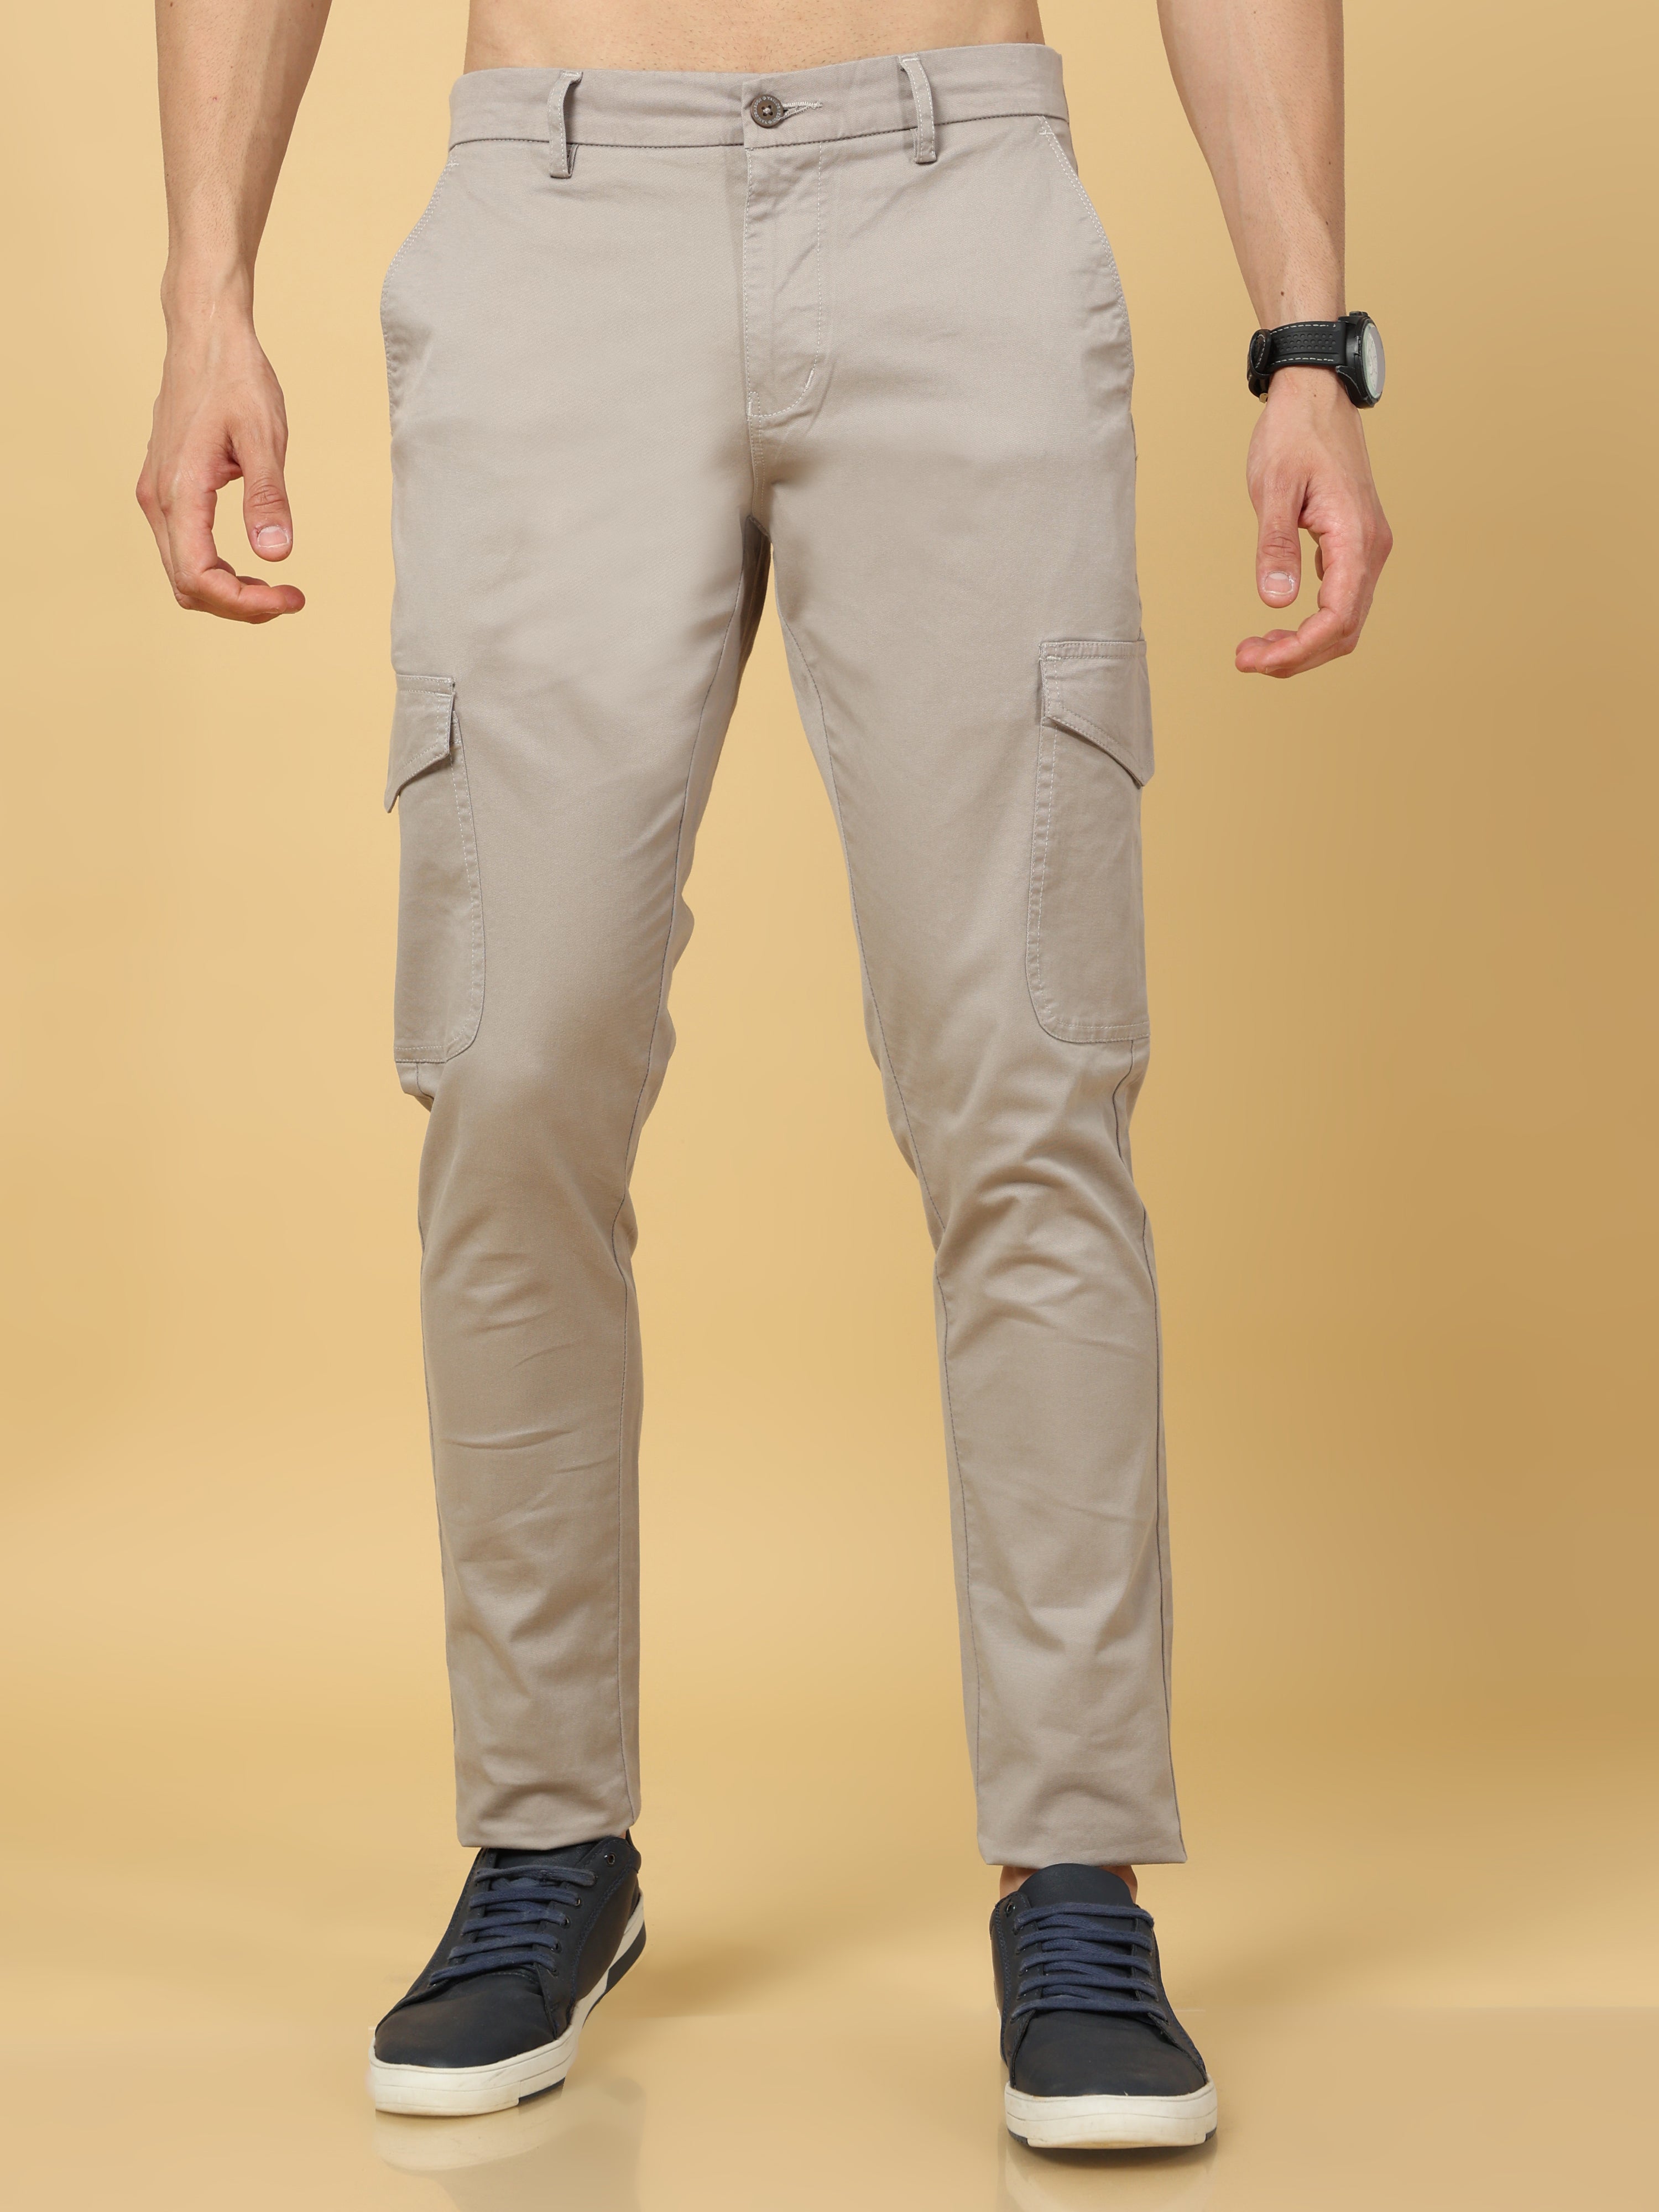 Vintage Double Zipper Cargo Pants For Men Slim Fit, Open Crotch, Casual  Bershka Cargo Trousers For Spring And Summer Outdoor Sex Large Size From  Mu02, $41.27 | DHgate.Com